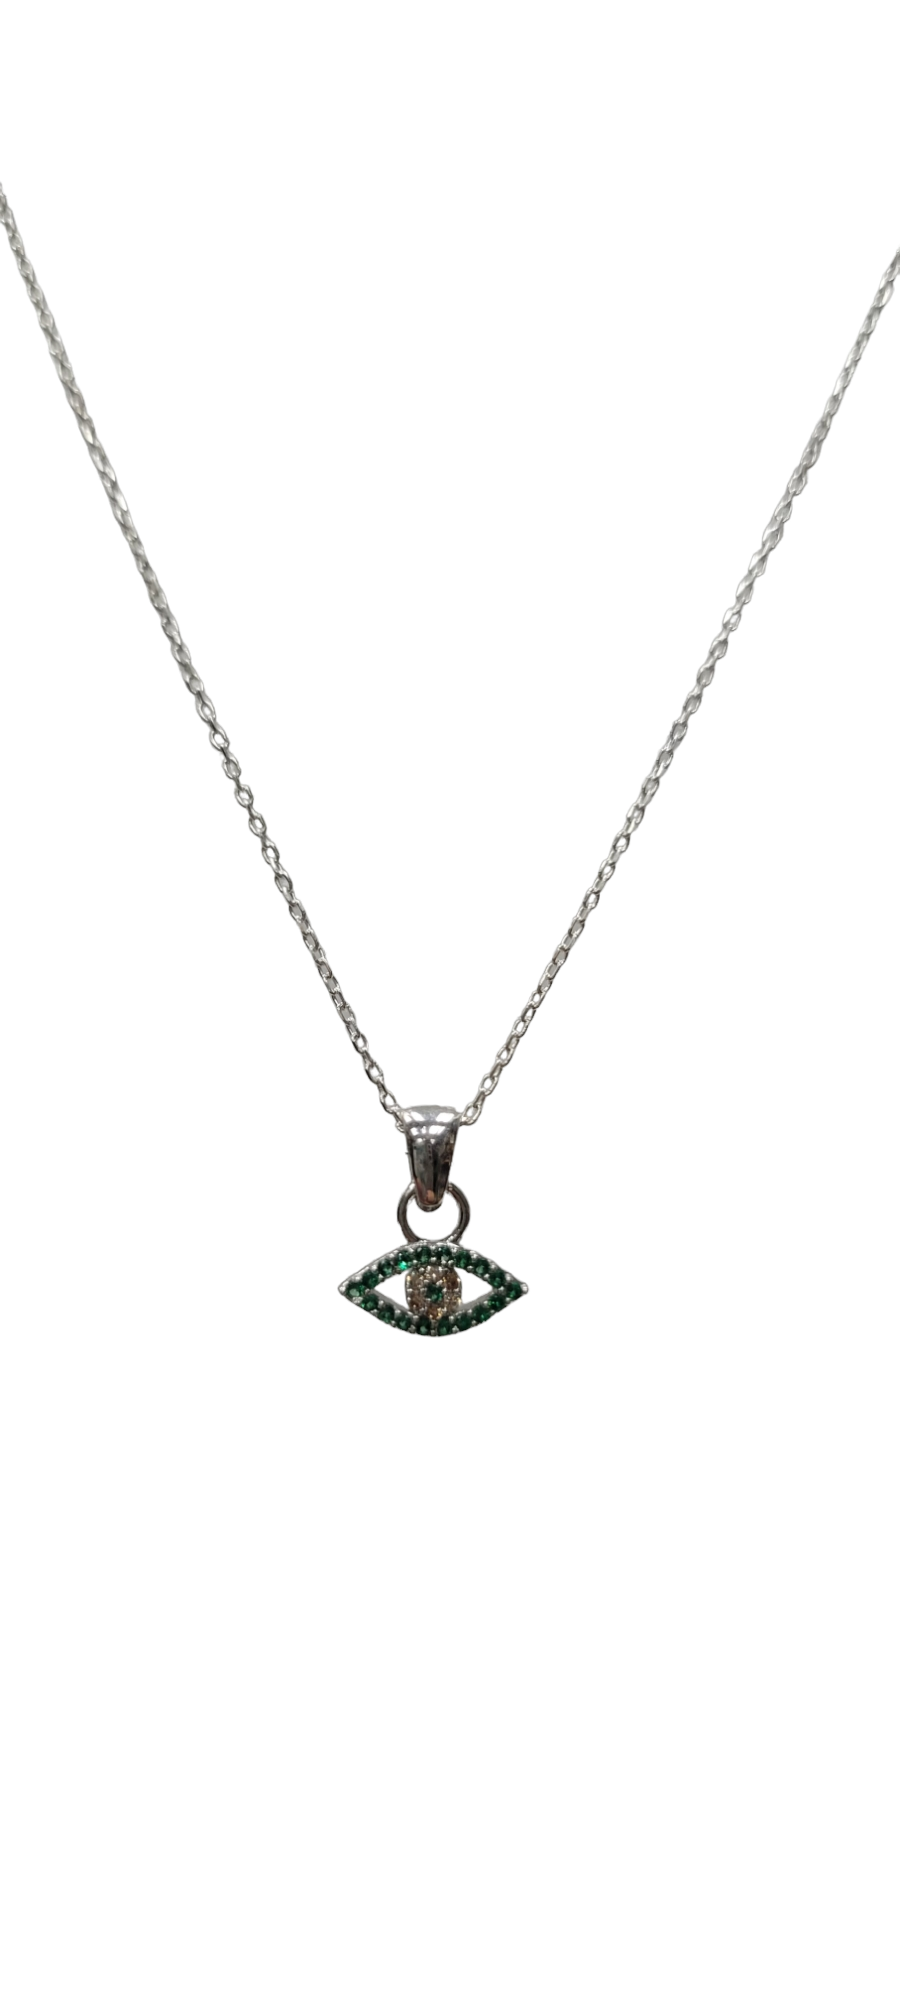 Swarovski Luckily Evil Eye Necklace rose gold-plated crystal cubic zirconia  white/blue zircon - Crystocraft